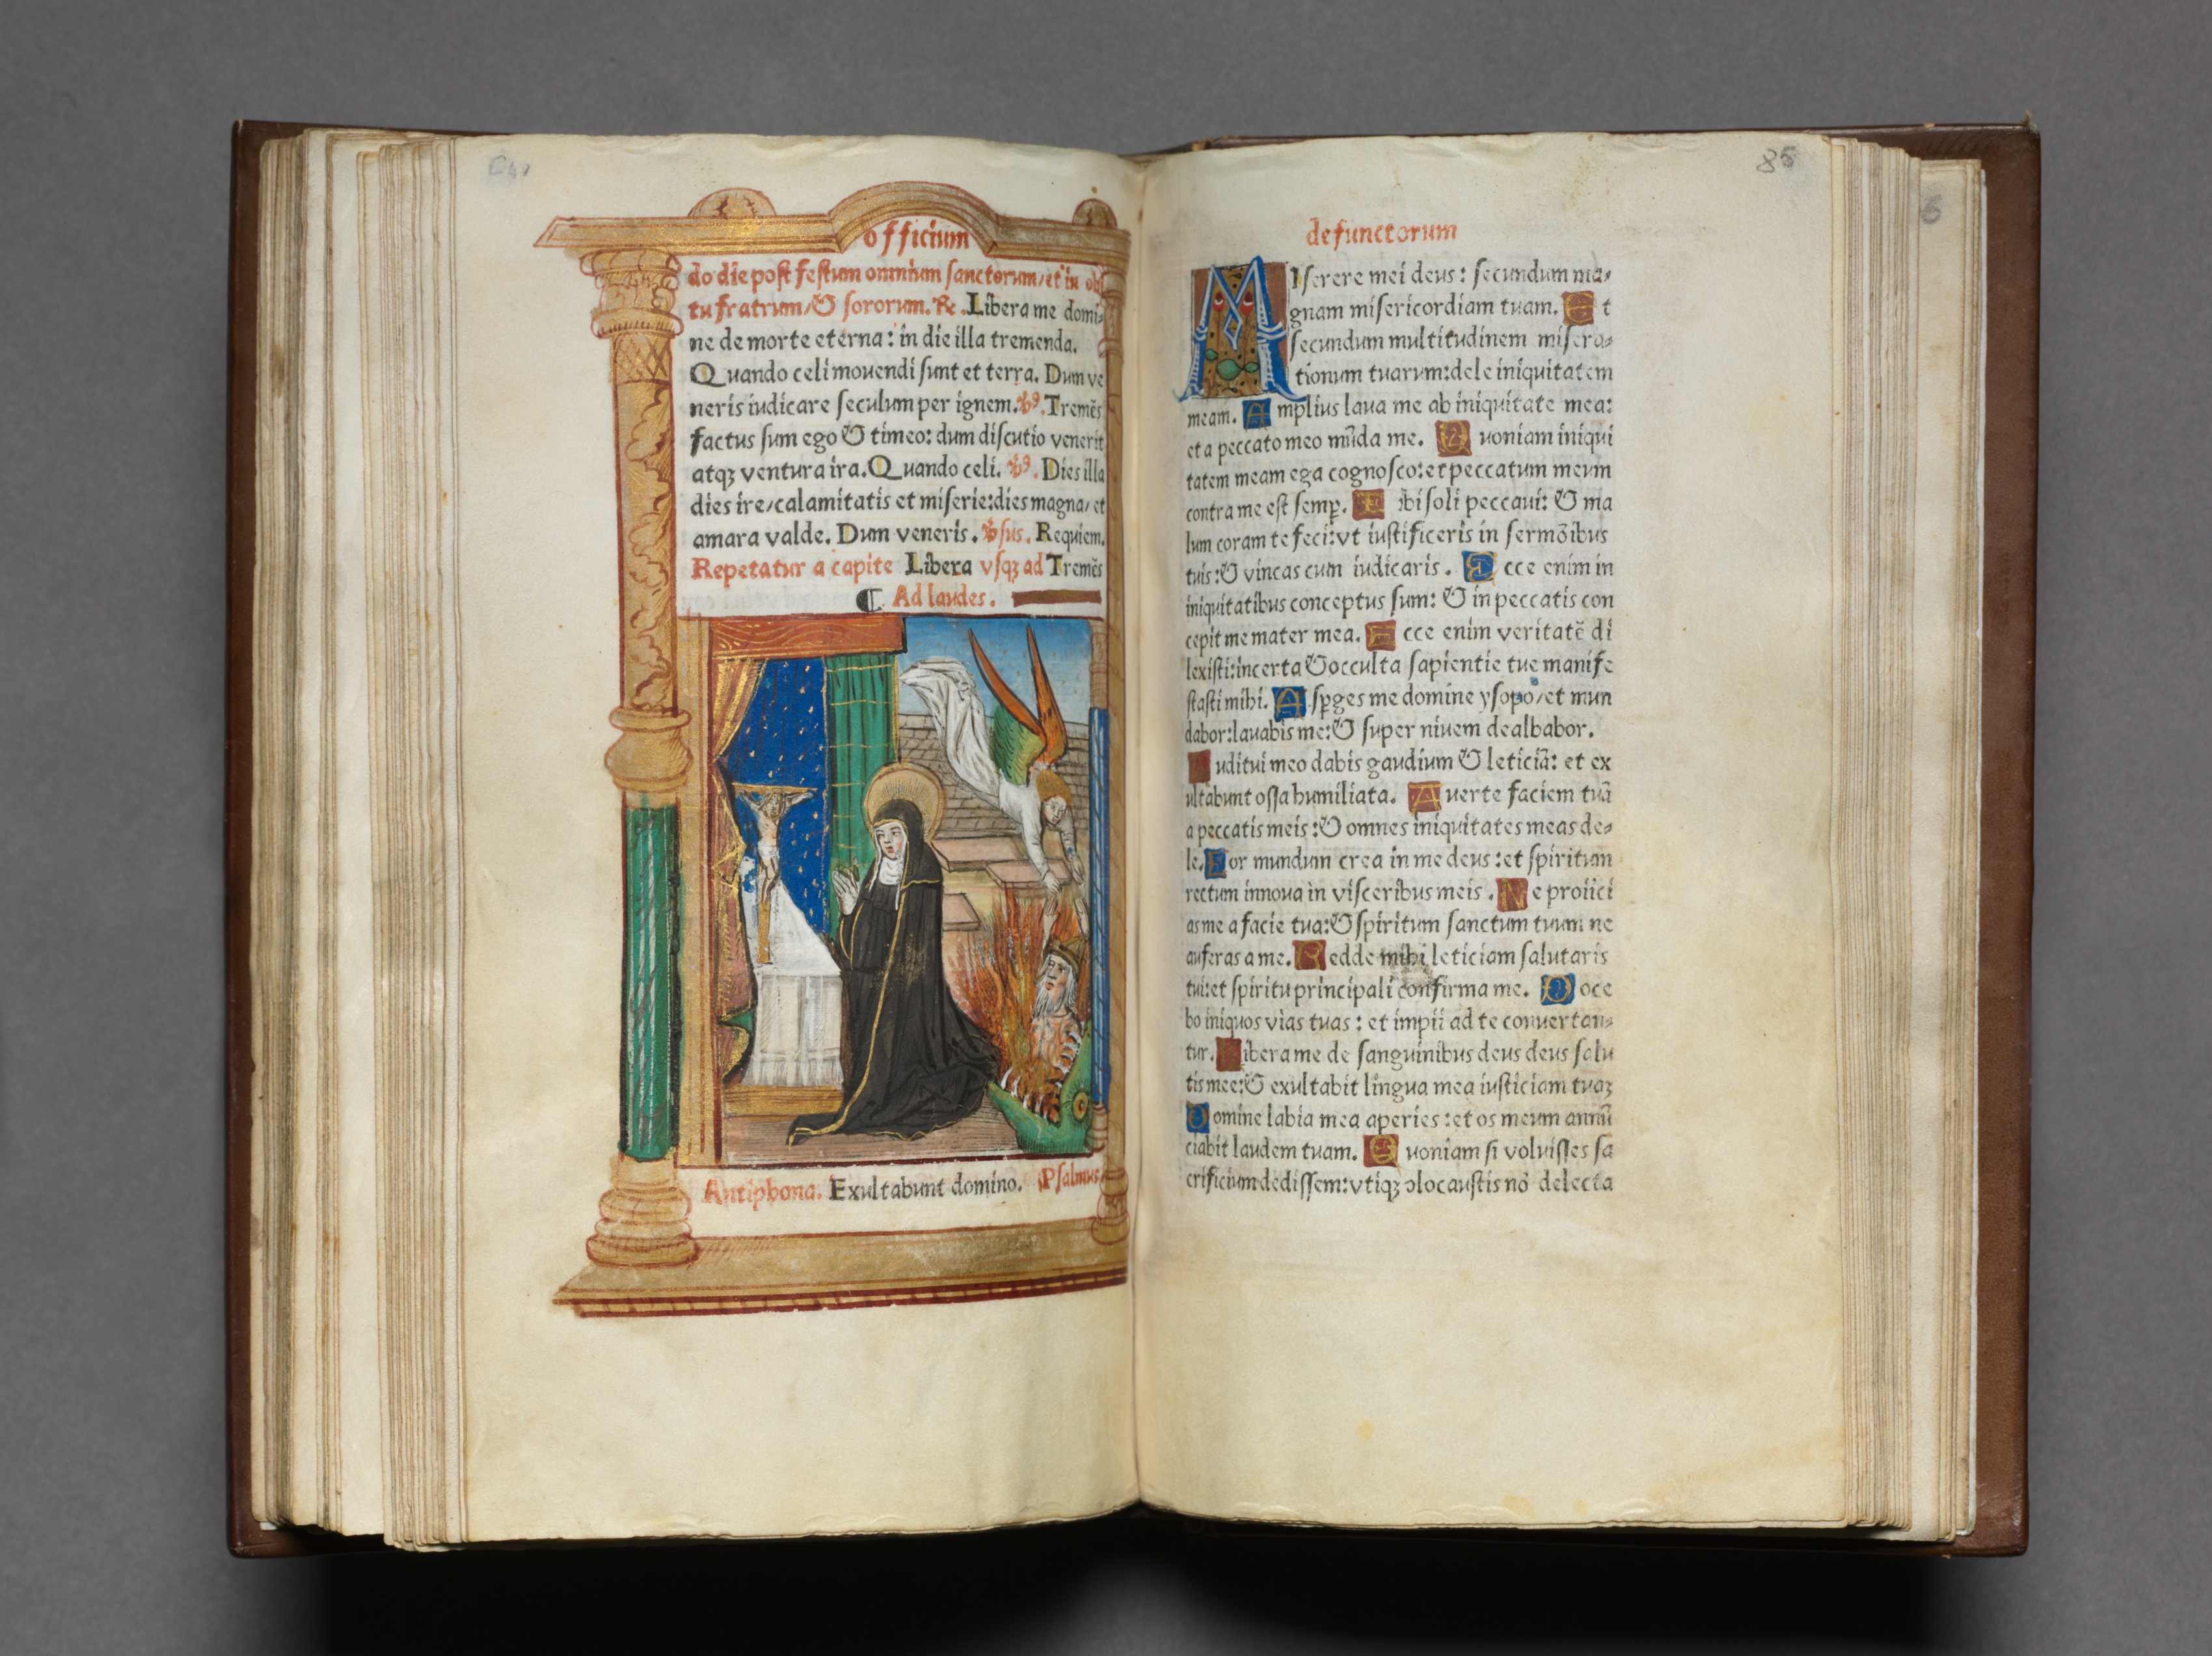 Printed Book of Hours (Use of Rome): fol. 85r, Dominican Nun